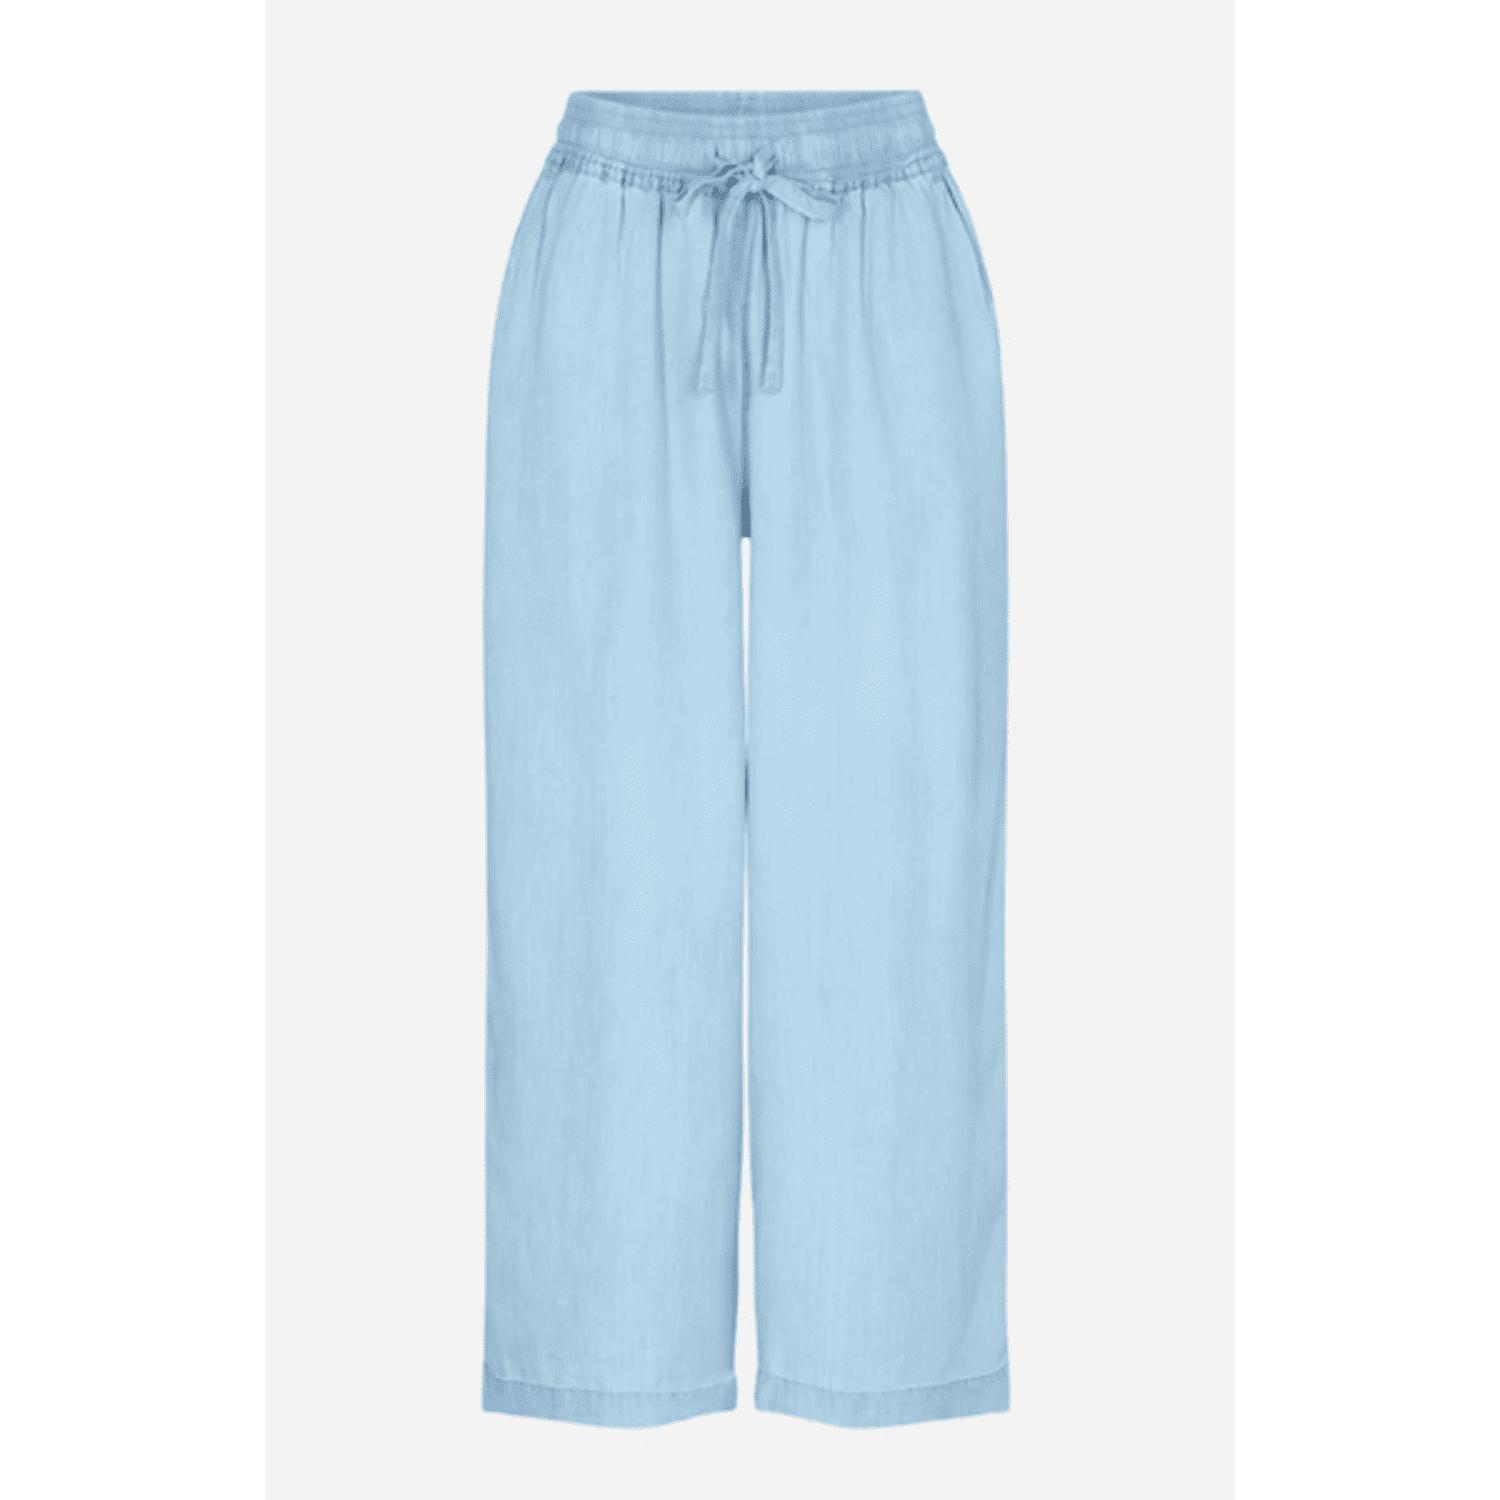 Soya Concept Roma Denim Look Trousers in Blue | Lyst